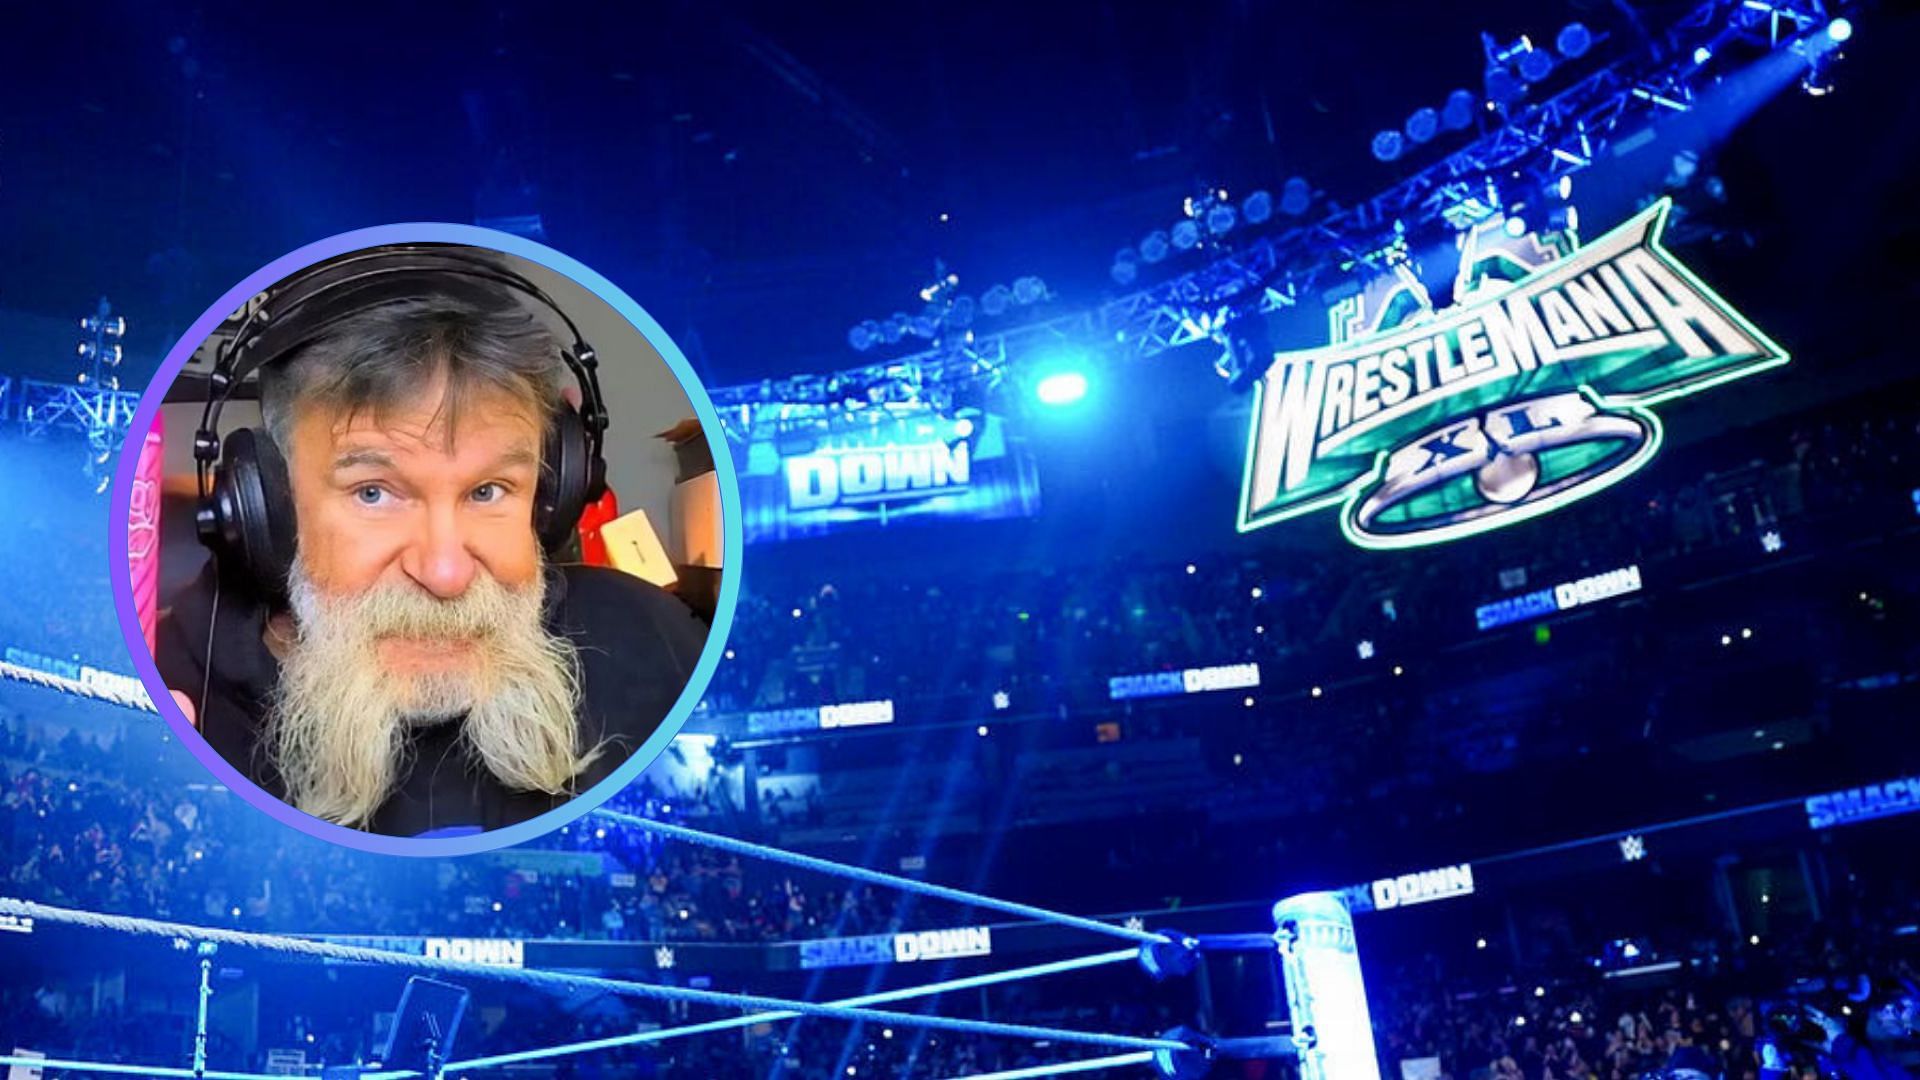 WWE presented a packed SmackDown lineup focussing on WrestleMania storylines.